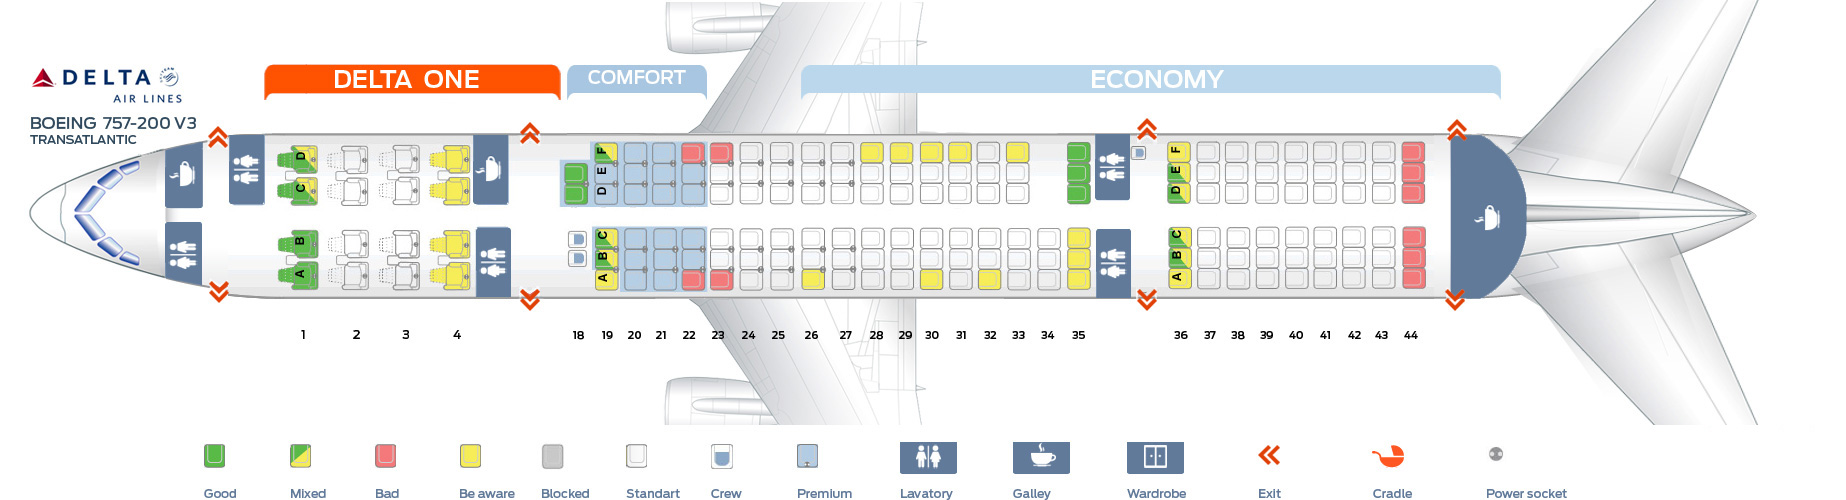 Delta Airlines 757 Seating Chart